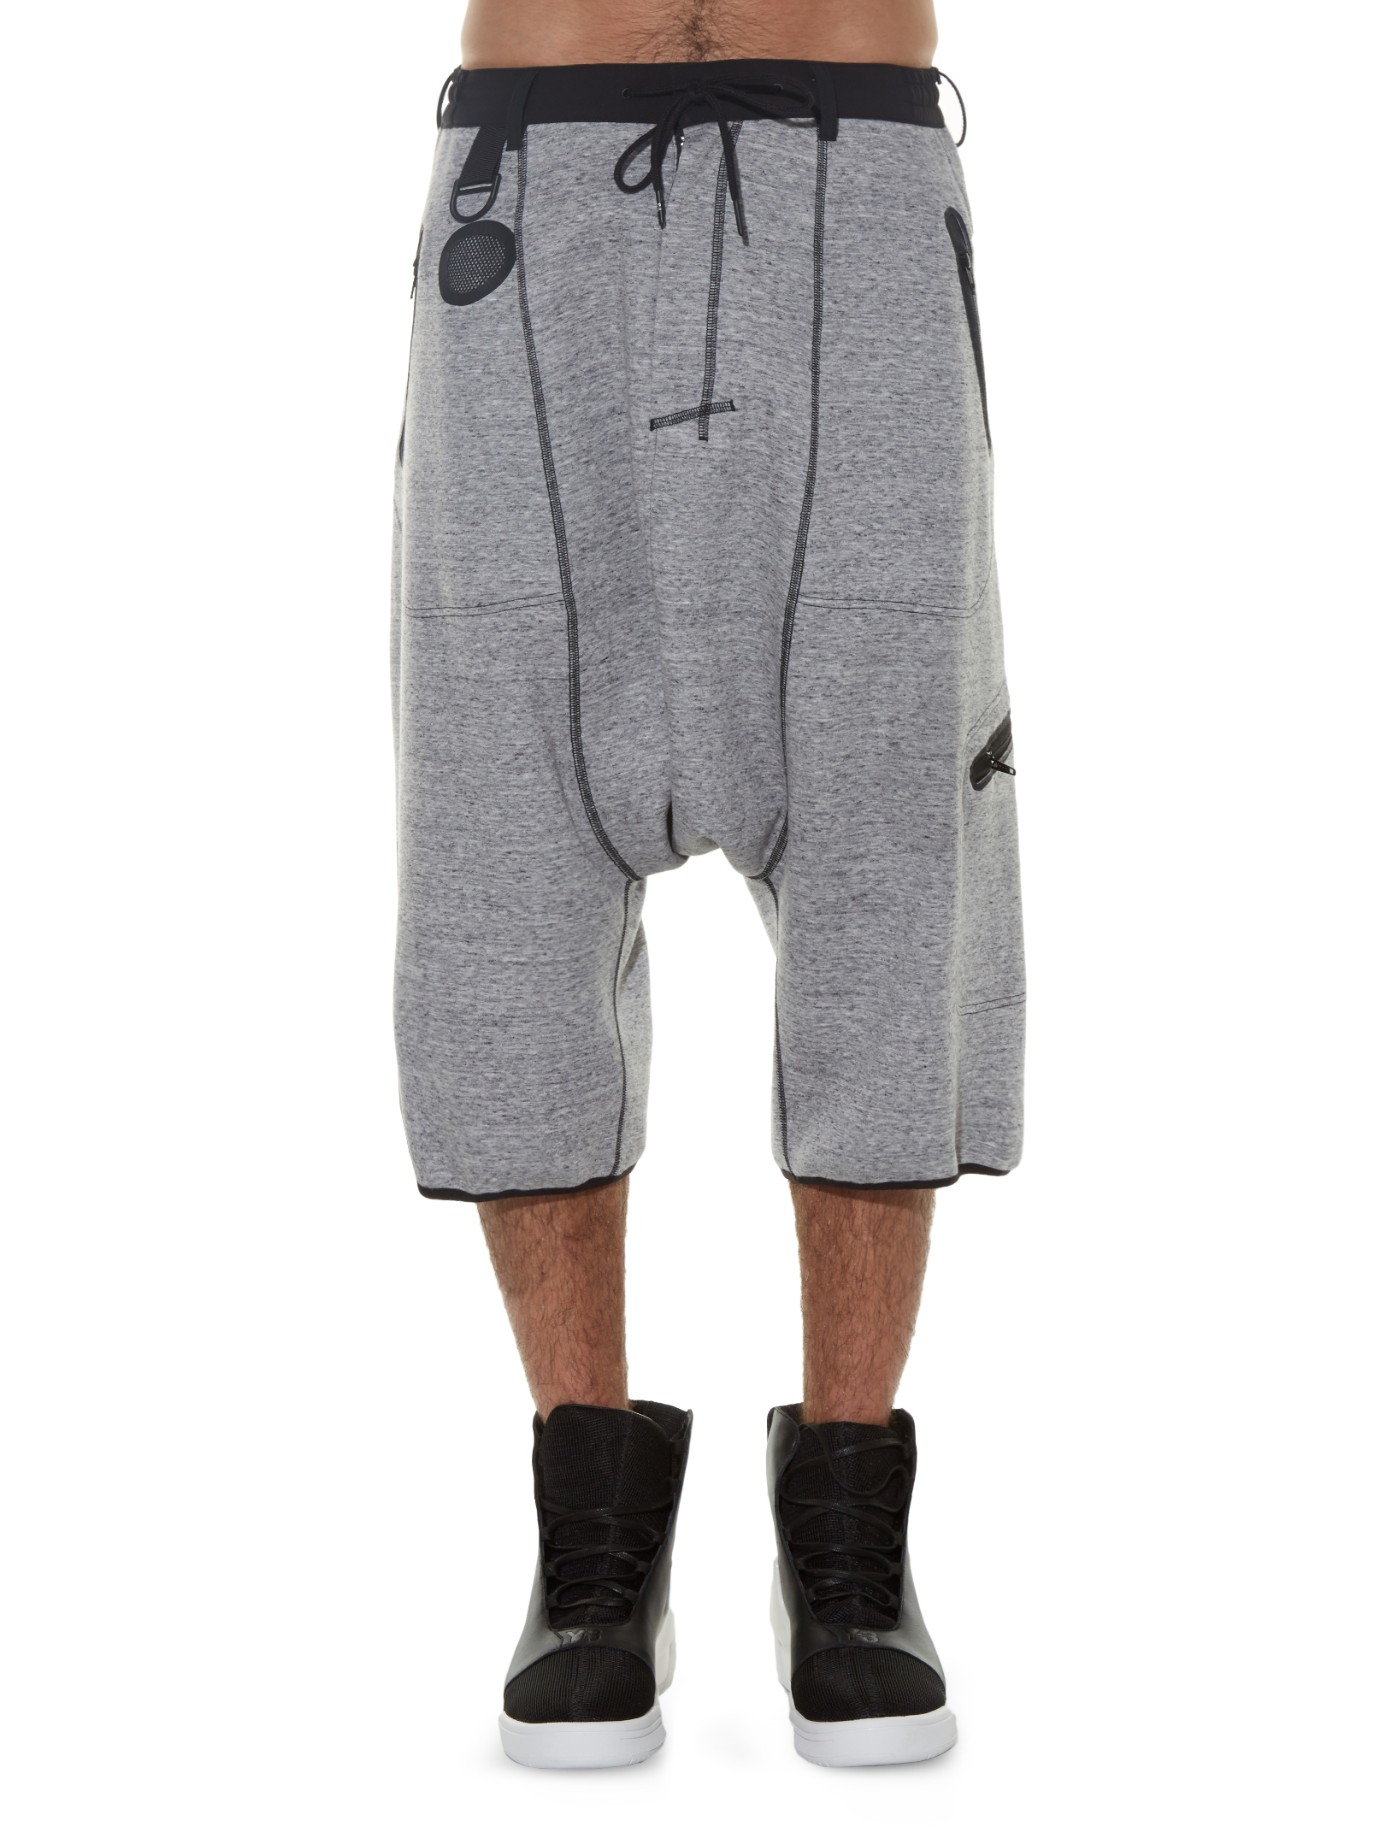 Jersey Shorts in Grey (Gray) for Men - Lyst